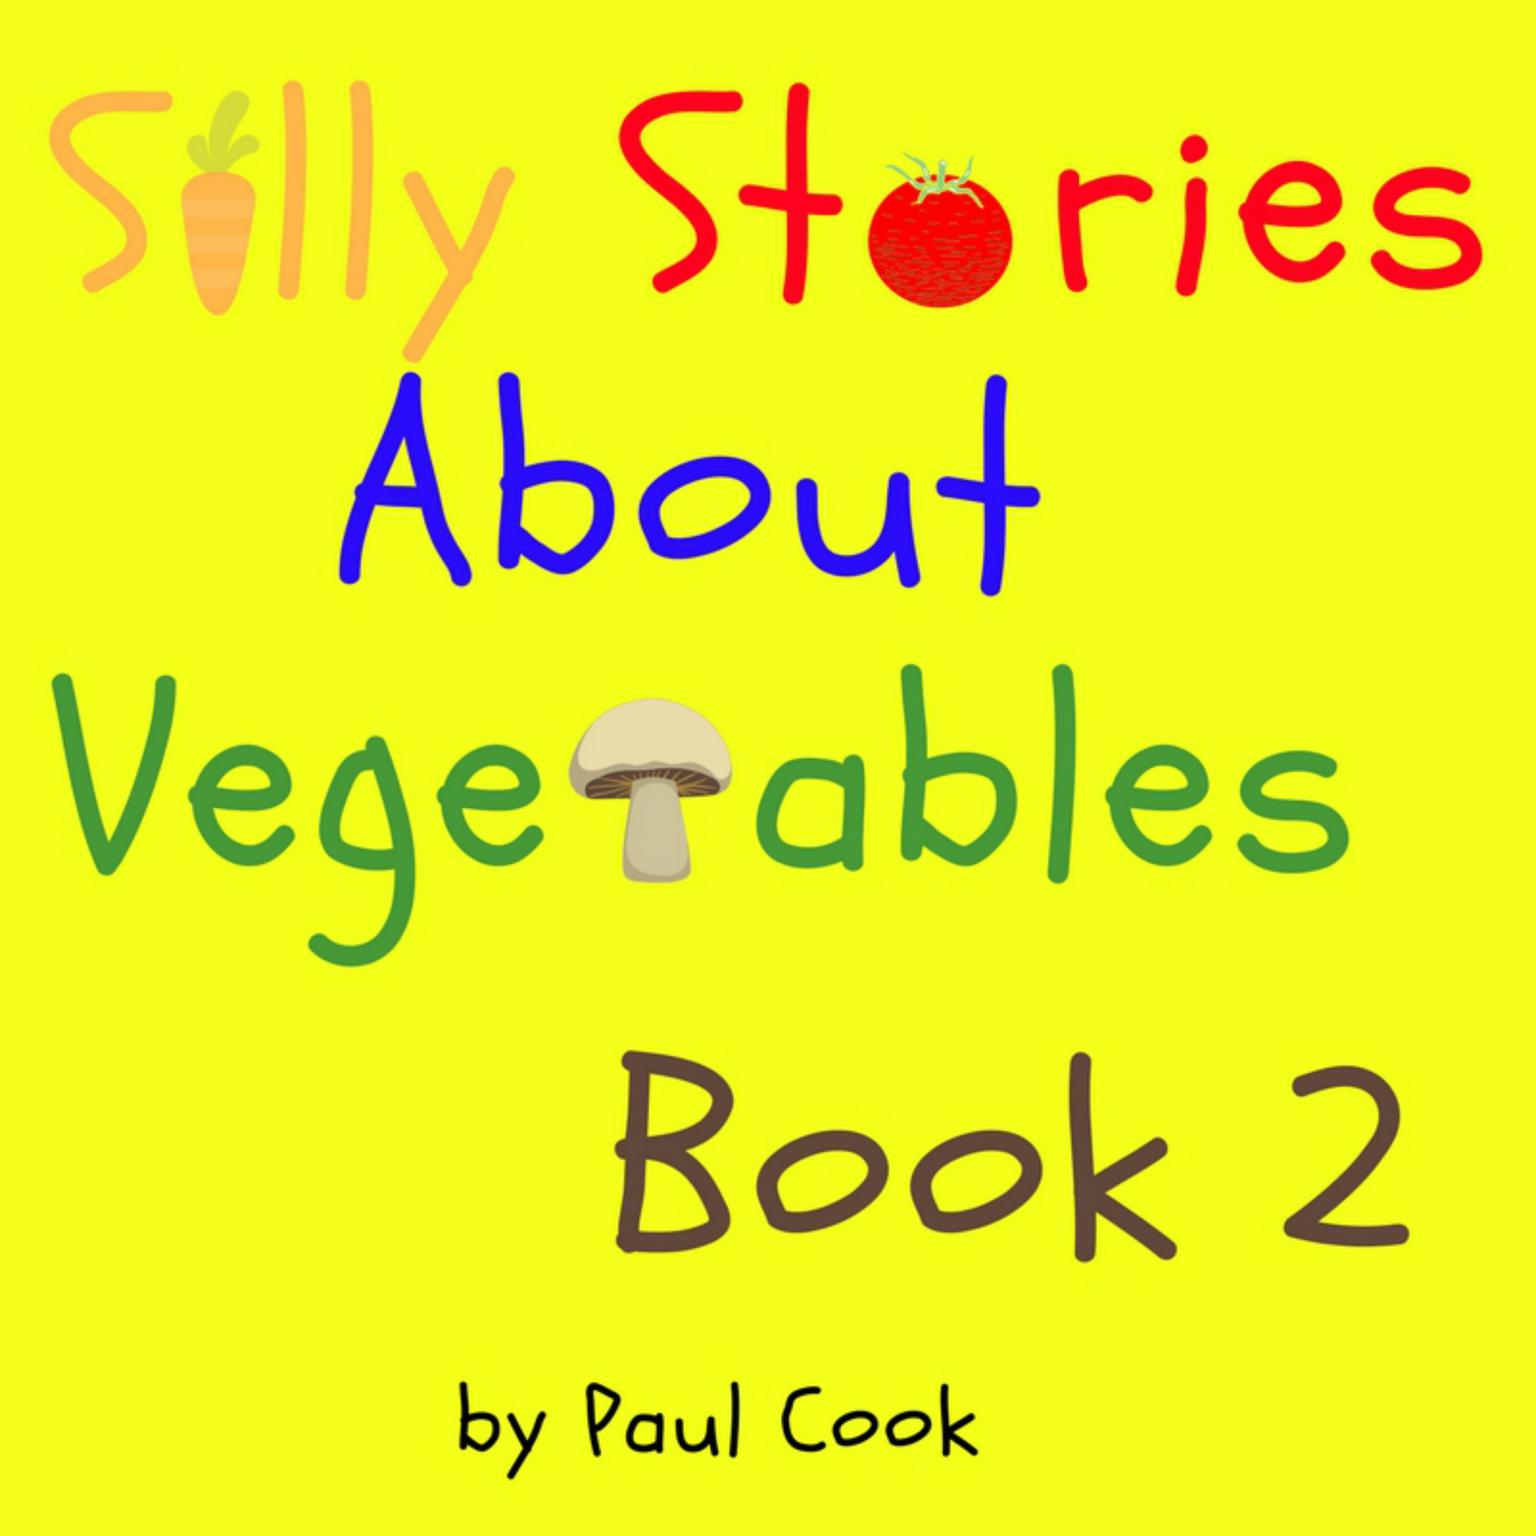 Silly Stories About Vegetables Book 2 Audiobook, by Paul Cook